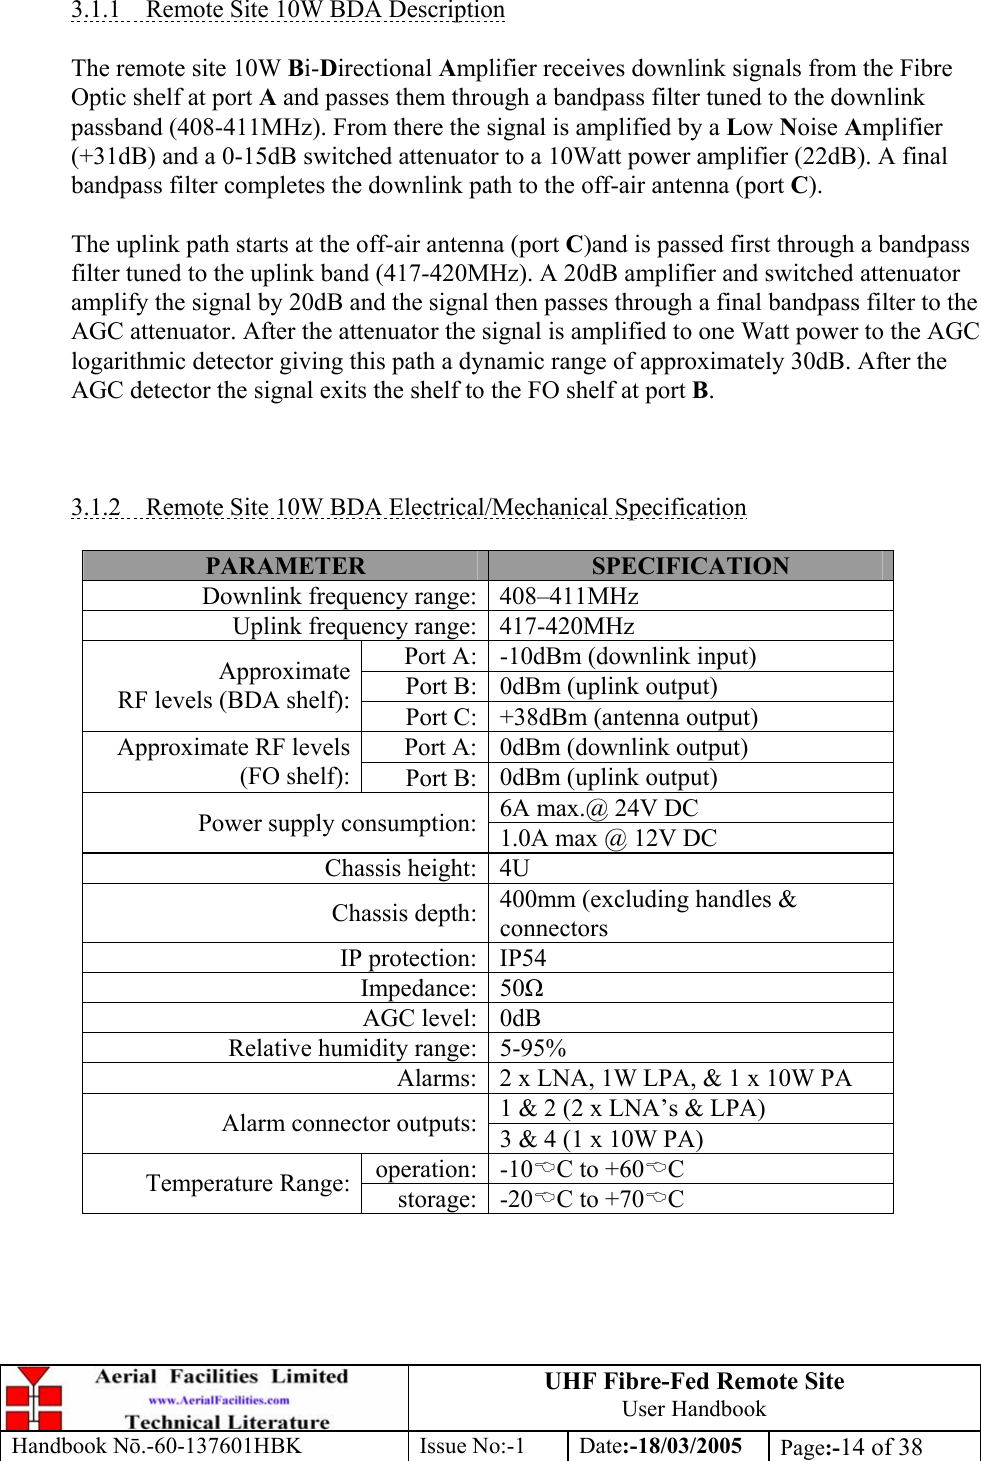 UHF Fibre-Fed Remote Site User Handbook Handbook N.-60-137601HBK Issue No:-1 Date:-18/03/2005  Page:-14 of 38    3.1.1  Remote Site 10W BDA Description  The remote site 10W Bi-Directional Amplifier receives downlink signals from the Fibre Optic shelf at port A and passes them through a bandpass filter tuned to the downlink passband (408-411MHz). From there the signal is amplified by a Low Noise Amplifier (+31dB) and a 0-15dB switched attenuator to a 10Watt power amplifier (22dB). A final bandpass filter completes the downlink path to the off-air antenna (port C).  The uplink path starts at the off-air antenna (port C)and is passed first through a bandpass filter tuned to the uplink band (417-420MHz). A 20dB amplifier and switched attenuator amplify the signal by 20dB and the signal then passes through a final bandpass filter to the AGC attenuator. After the attenuator the signal is amplified to one Watt power to the AGC logarithmic detector giving this path a dynamic range of approximately 30dB. After the AGC detector the signal exits the shelf to the FO shelf at port B.    3.1.2  Remote Site 10W BDA Electrical/Mechanical Specification  PARAMETER  SPECIFICATION Downlink frequency range: 408–411MHz Uplink frequency range: 417-420MHz Port A: -10dBm (downlink input) Port B: 0dBm (uplink output) Approximate RF levels (BDA shelf):  Port C: +38dBm (antenna output) Port A: 0dBm (downlink output) Approximate RF levels (FO shelf):  Port B: 0dBm (uplink output) 6A max.@ 24V DC Power supply consumption: 1.0A max @ 12V DC Chassis height: 4U Chassis depth: 400mm (excluding handles &amp; connectors IP protection: IP54 Impedance: 50 AGC level: 0dB Relative humidity range: 5-95% Alarms: 2 x LNA, 1W LPA, &amp; 1 x 10W PA 1 &amp; 2 (2 x LNA’s &amp; LPA) Alarm connector outputs: 3 &amp; 4 (1 x 10W PA) operation: -10%C to +60%C Temperature Range:  storage: -20%C to +70%C  